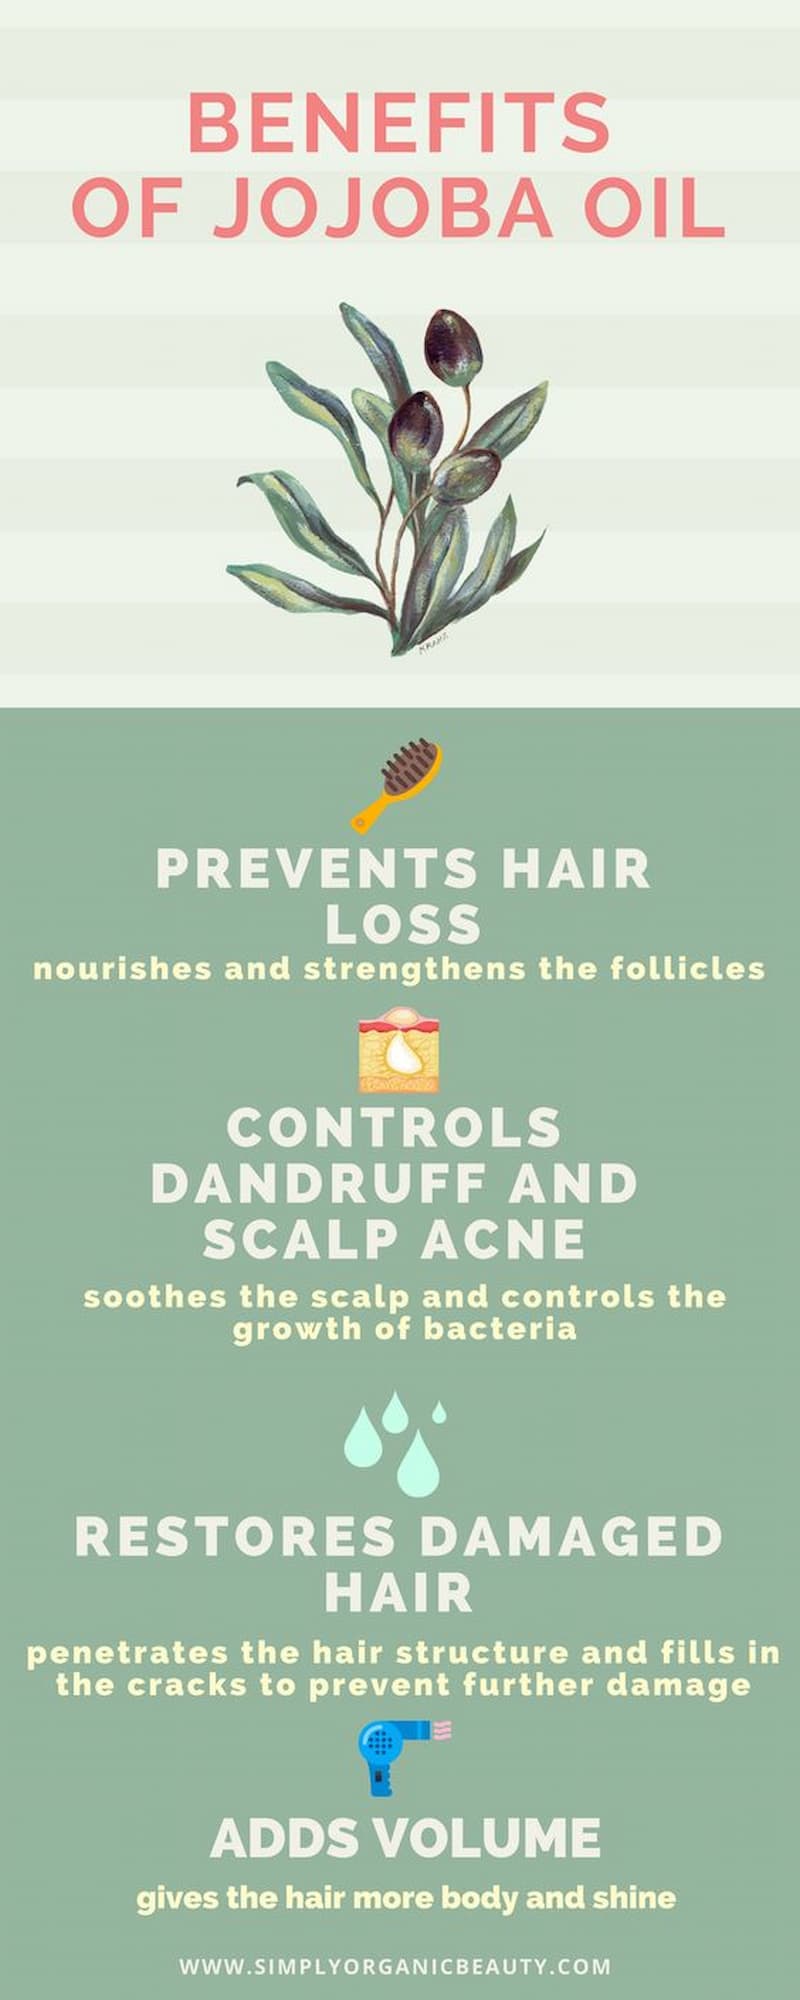 What are the benefits of jojoba oil for hair and skin?